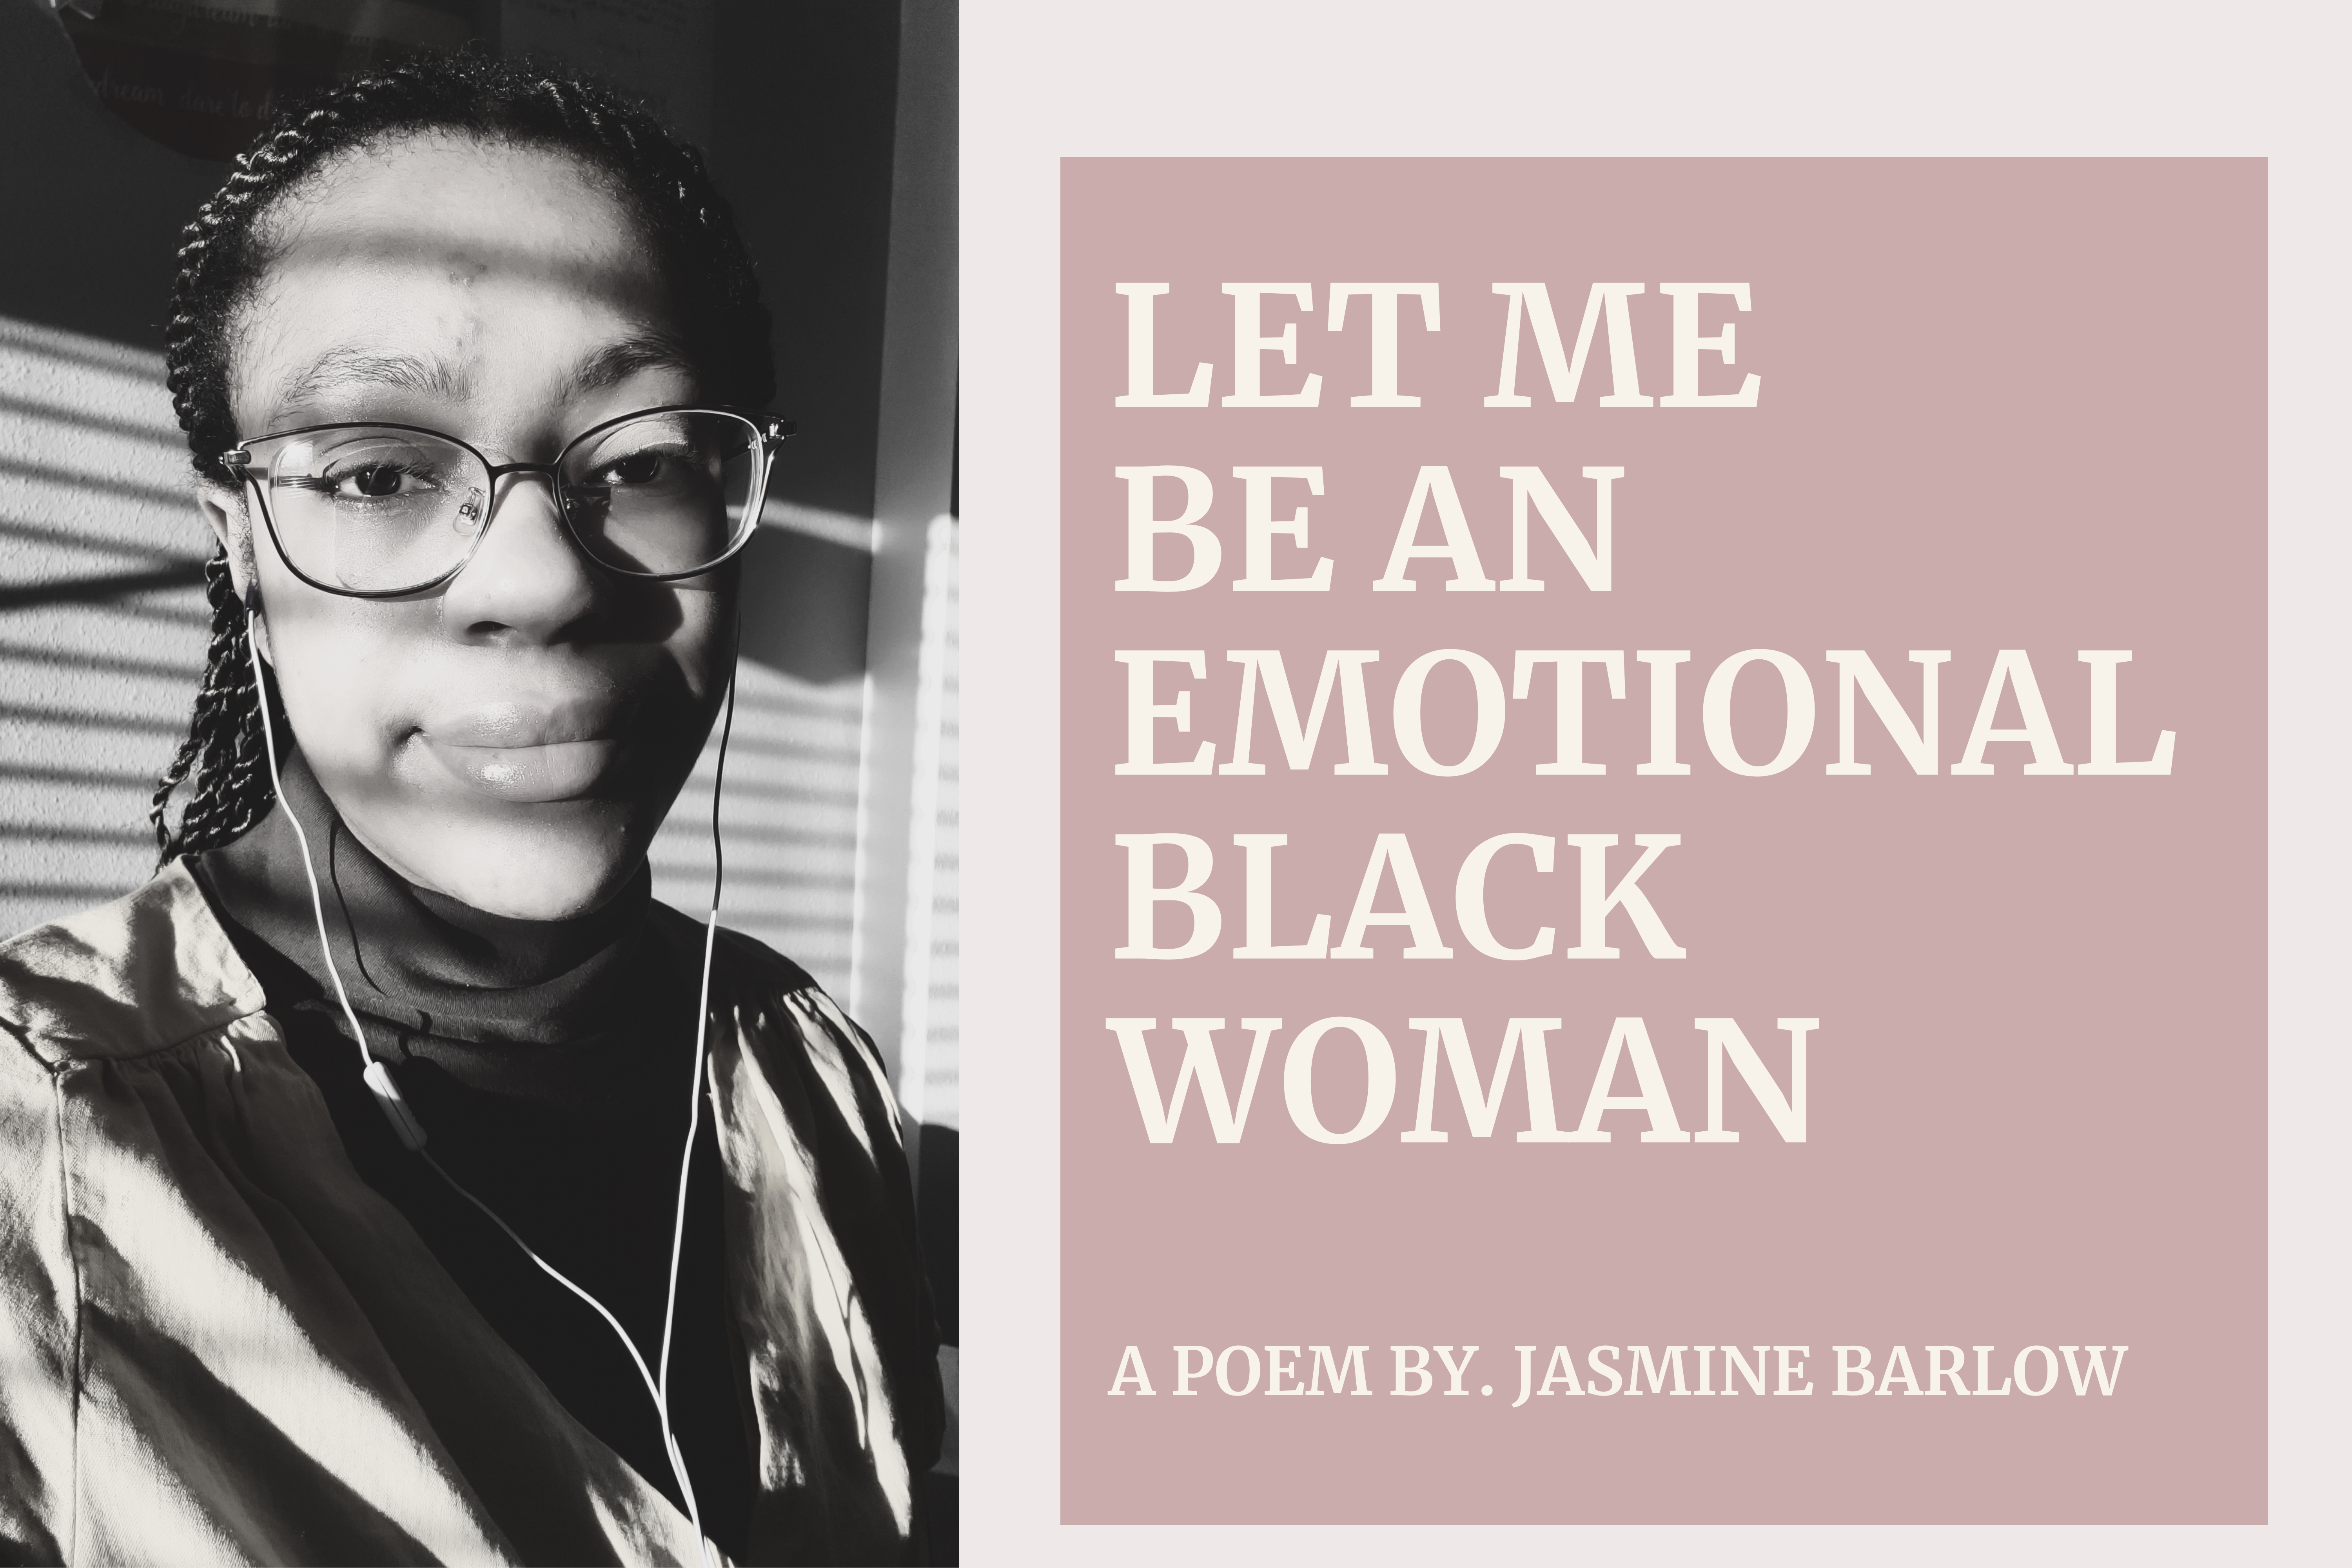 Let Me Be An Emotional Black Woman. A poem by. Jasmine Barlow.